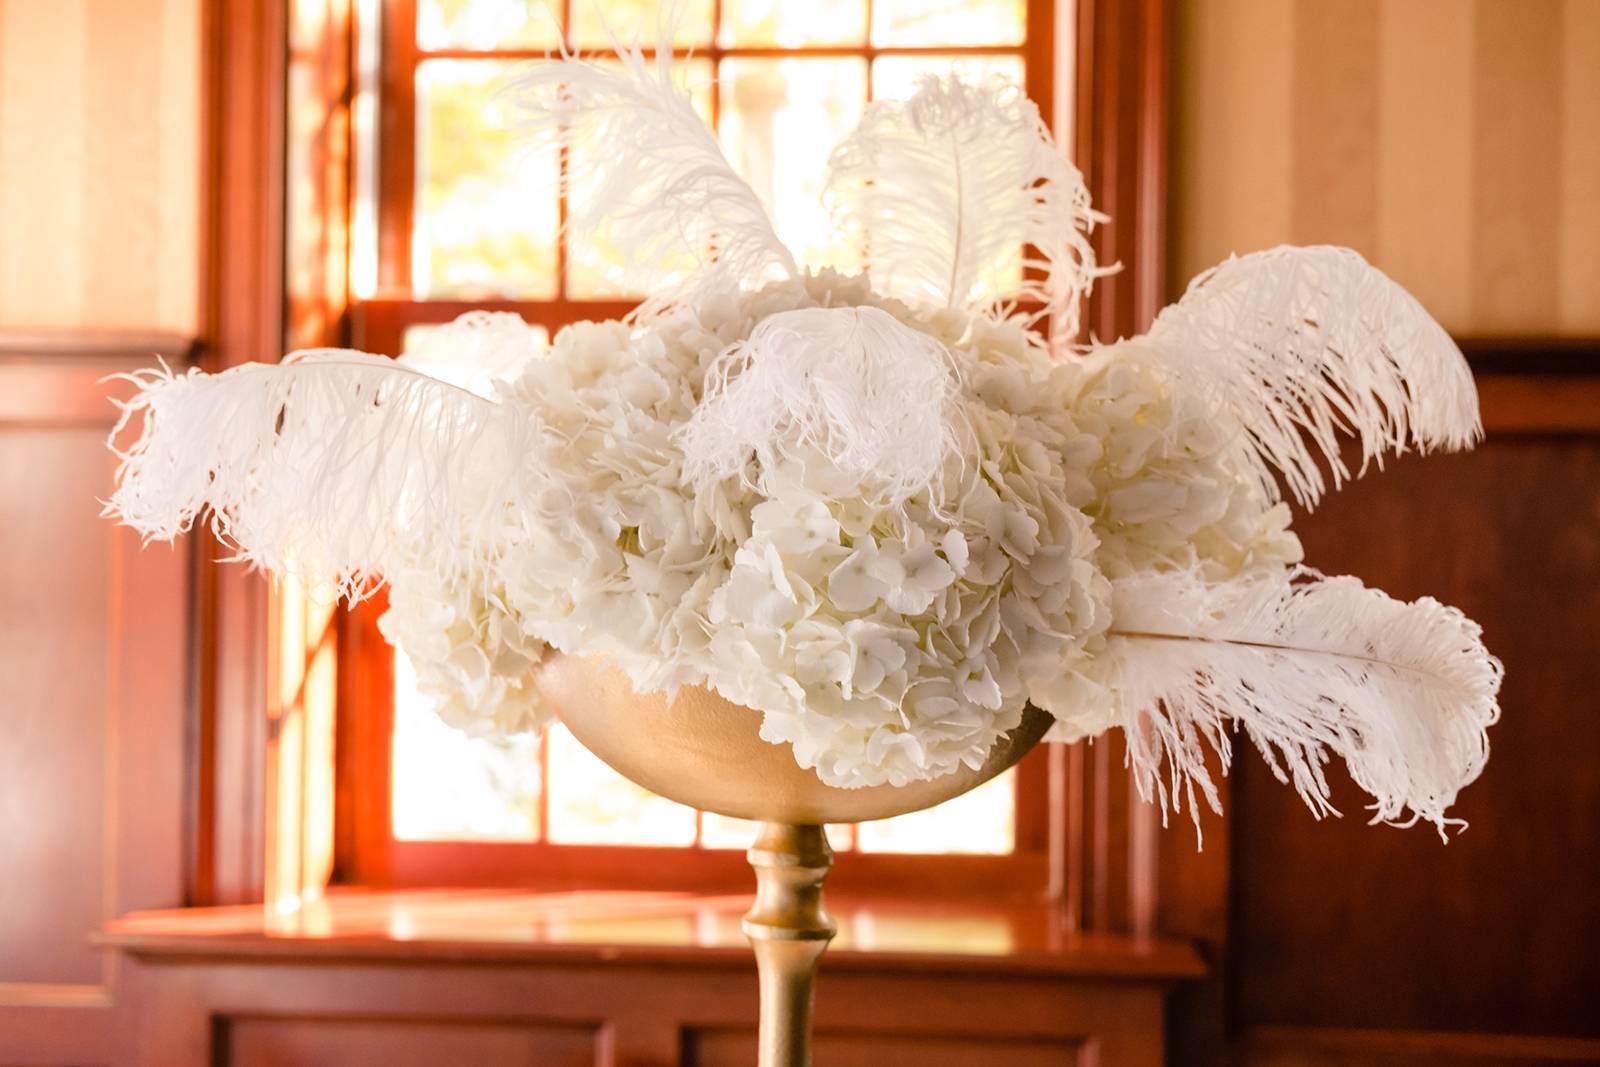 old hollywood gatsby glam centerpieces, white feather floral centerpieces, tall white hydrangeas cen